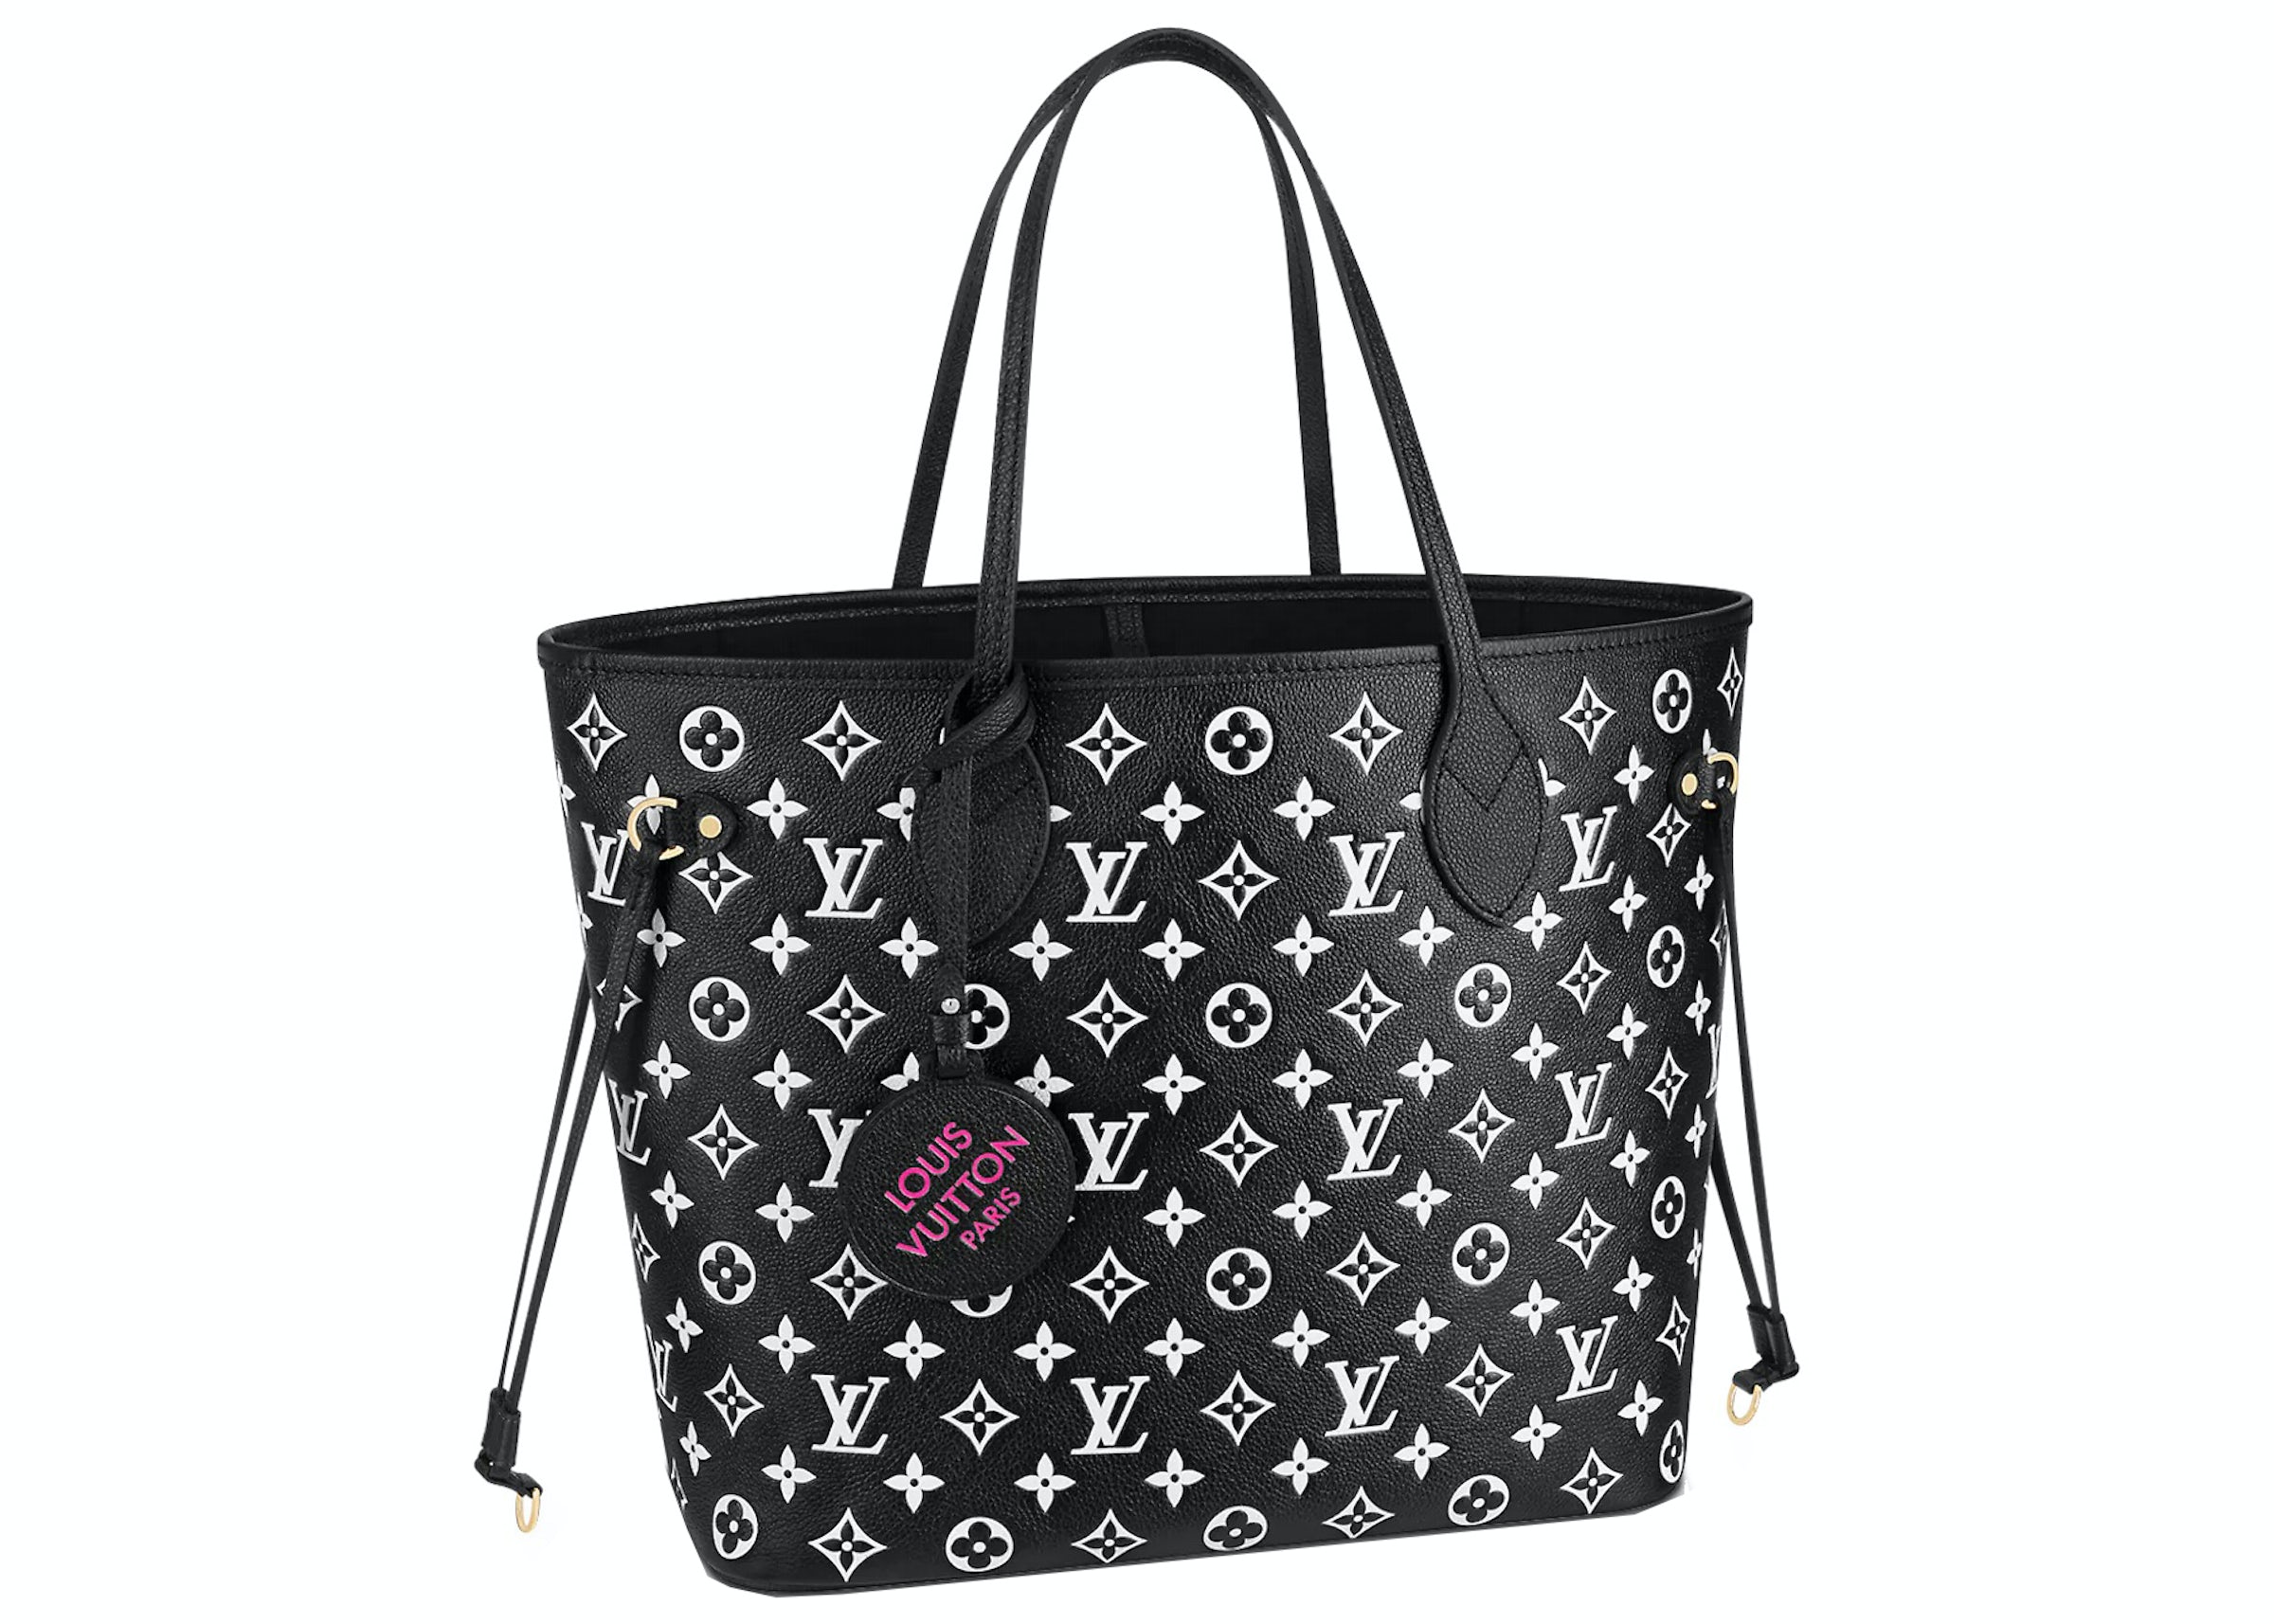 louis vuitton neverfull white and pink